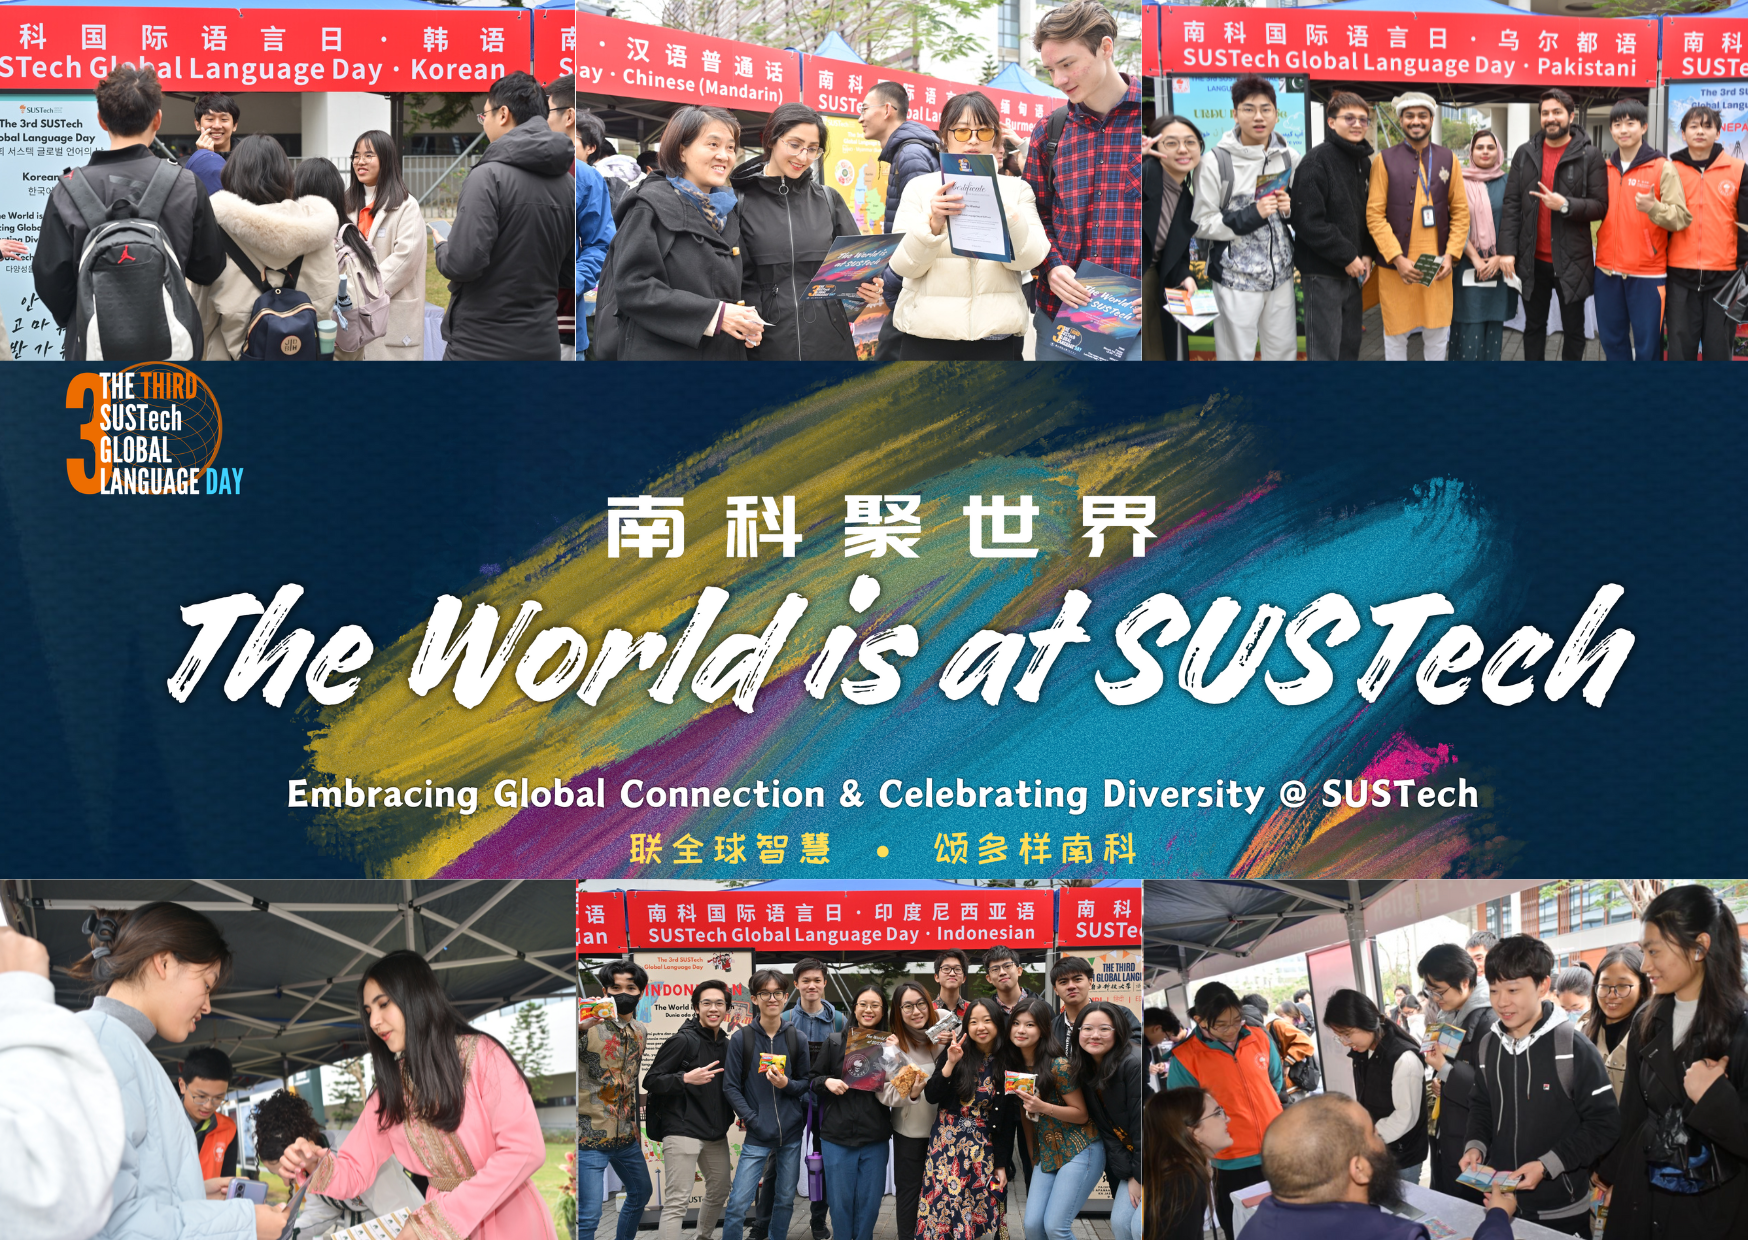 SUSTech’s 3rd Global Language Day celebrates linguistic diversity and global connections